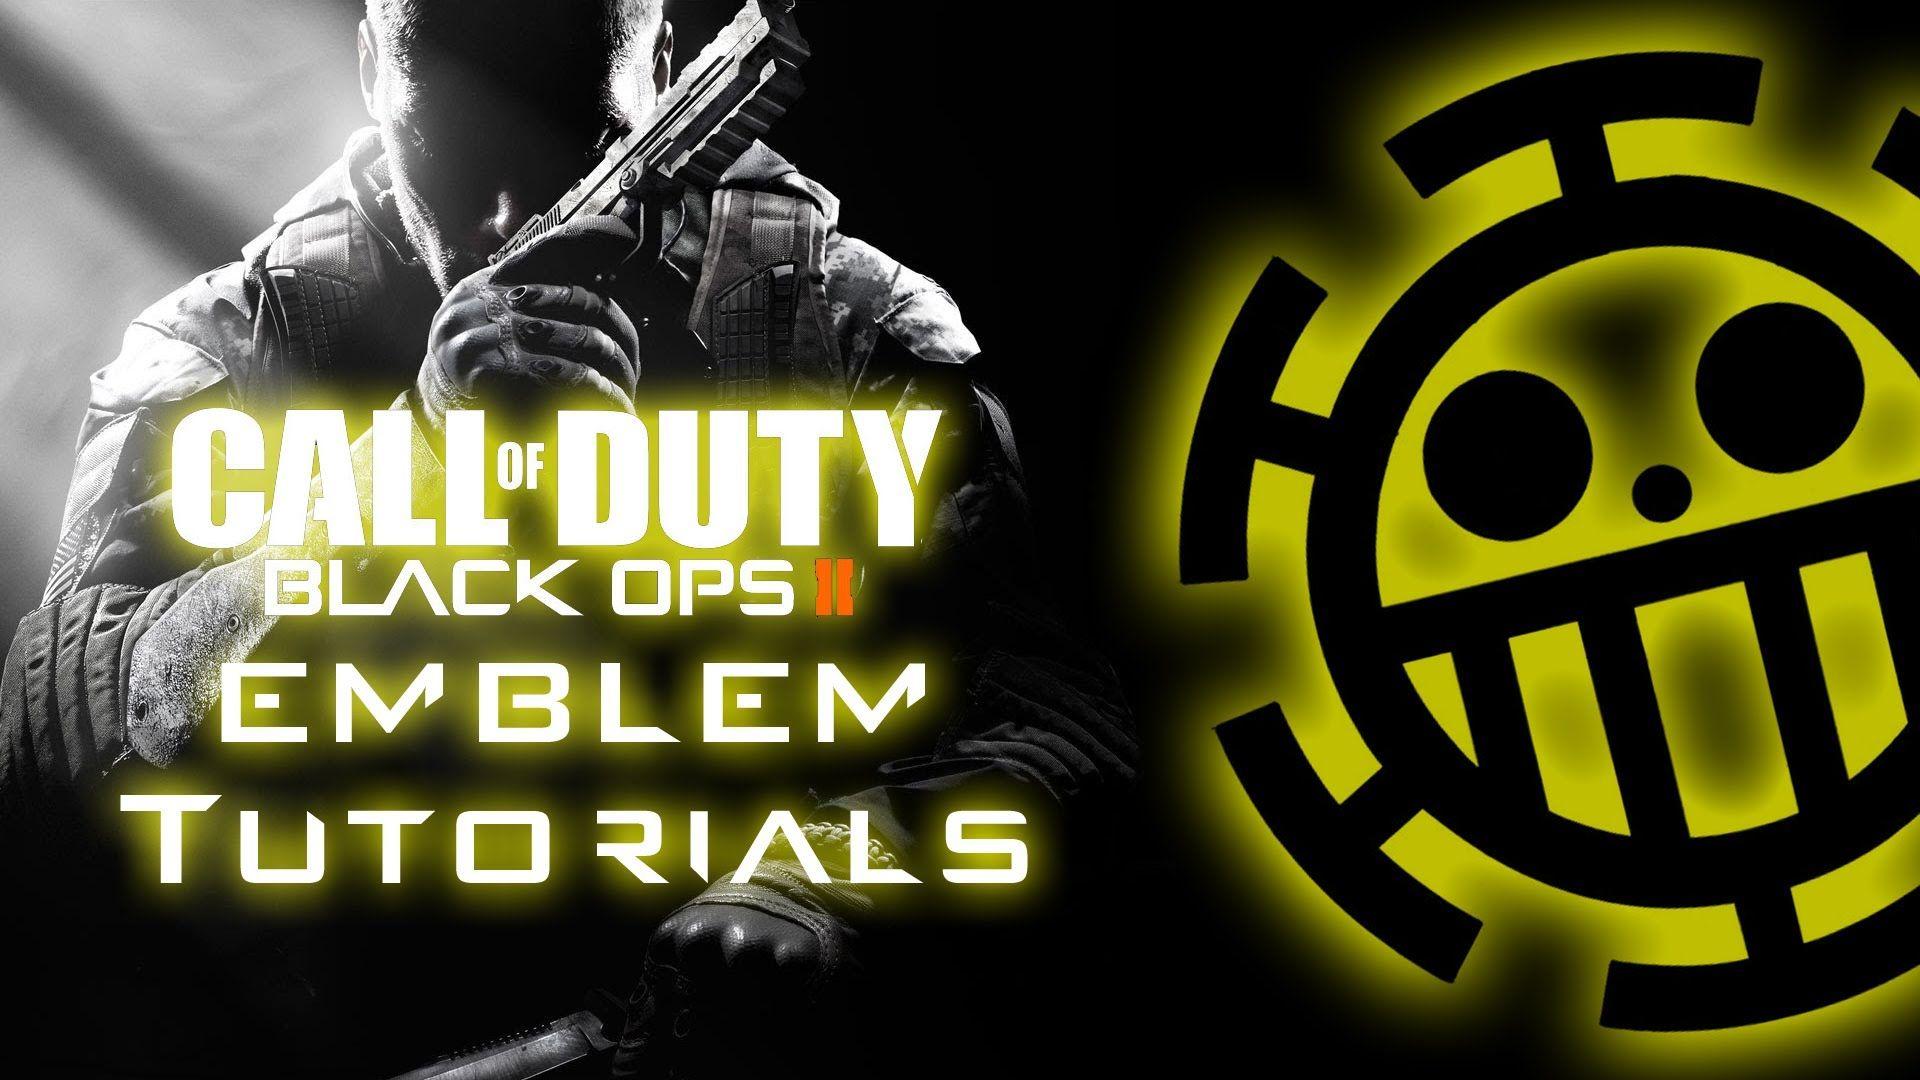 BLACK OPS 2 Tutorial. Heart Pirates Jolly Roger Law